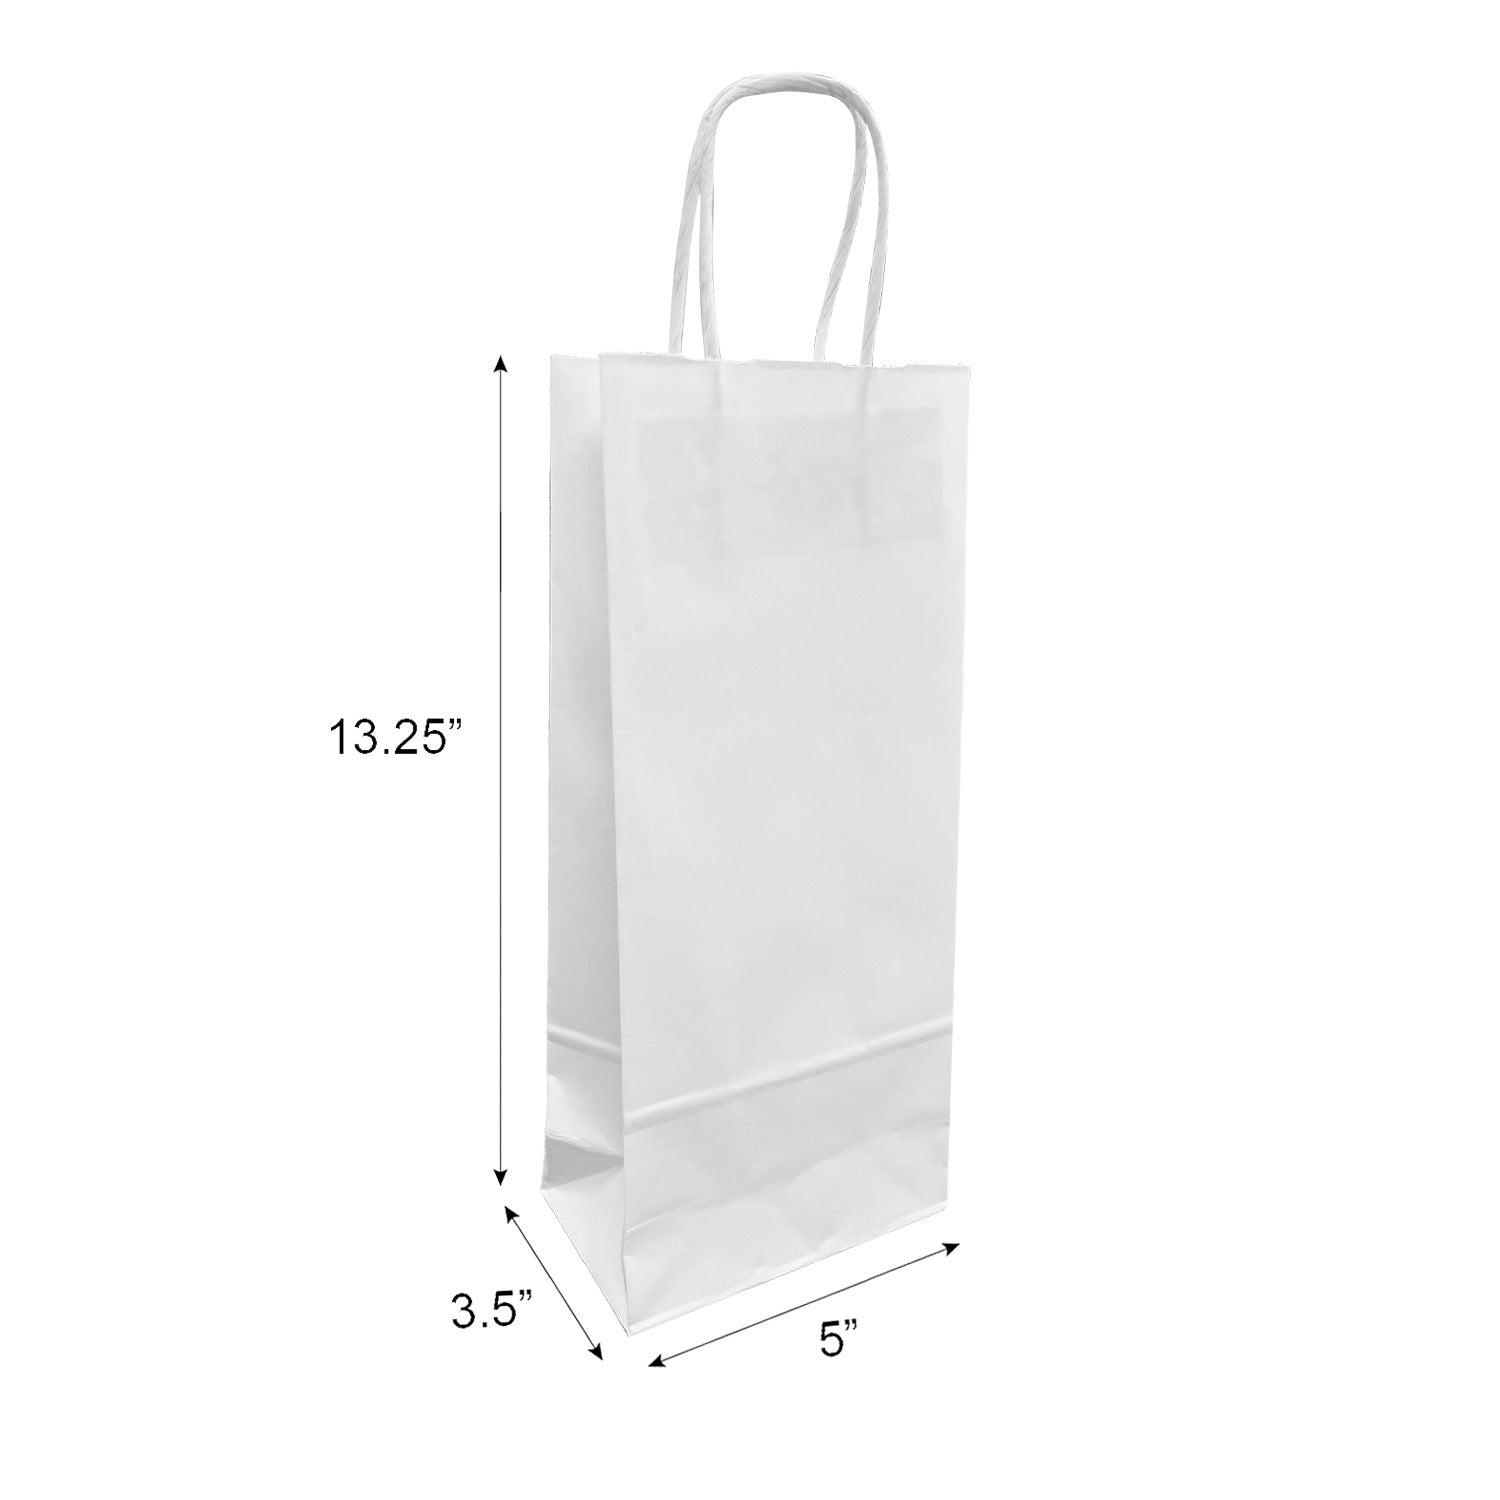 250 Pcs, Wine, 5.5x3.25x13 inches, White Kraft Paper Bags, with Twisted Handle